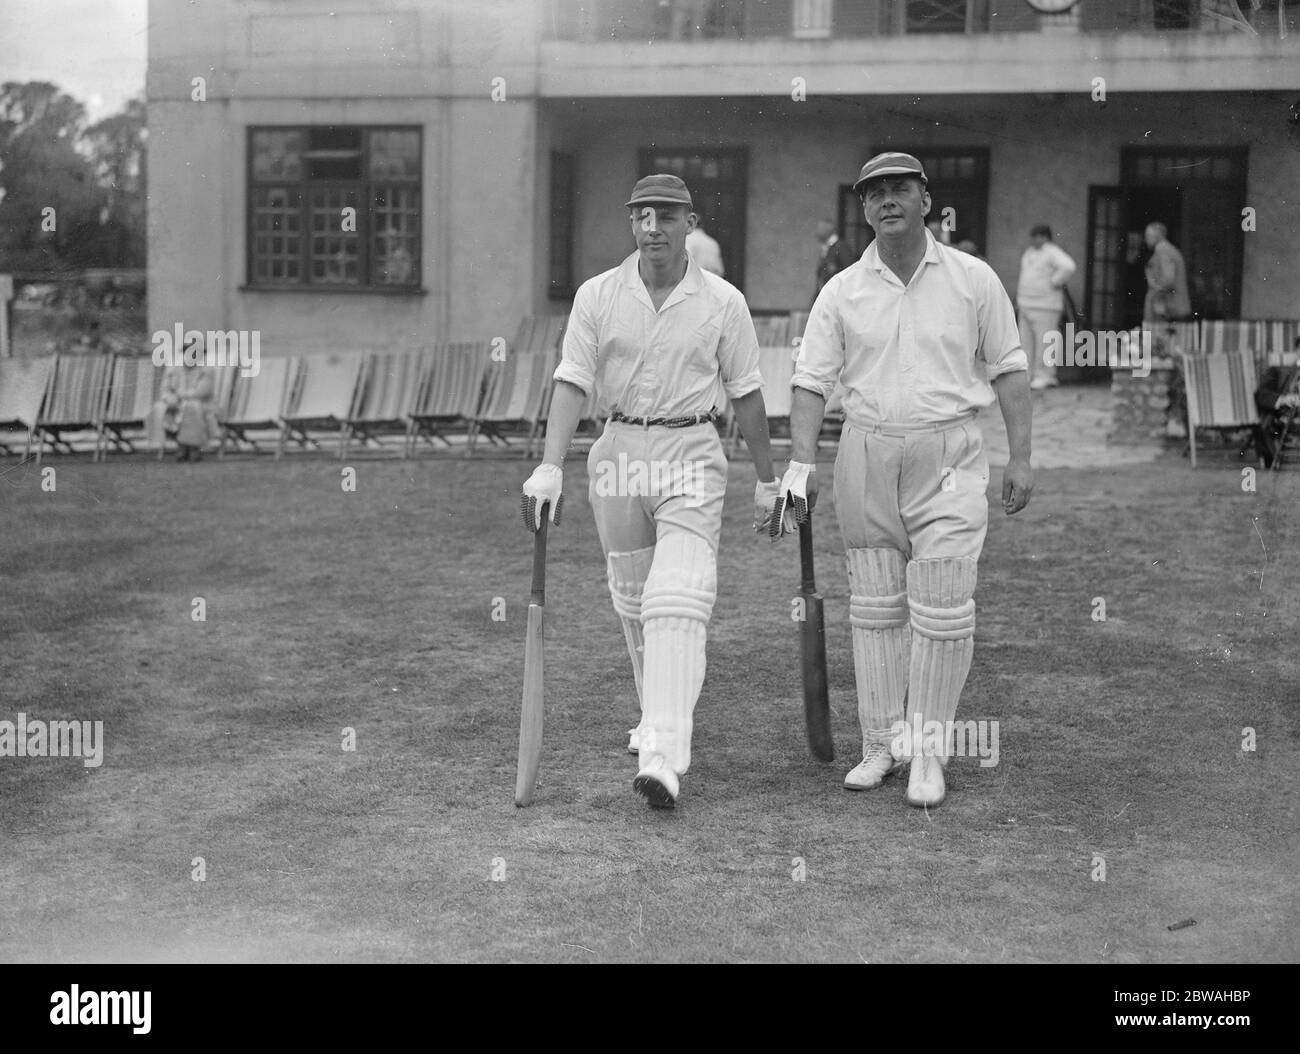 Actors versus musicians cricket at Hampstead Cricket Club Peter Cranmer and Pat Beckett going out to bat for the musicians ( The former is a rugby International ) 27 July 1934 Stock Photo